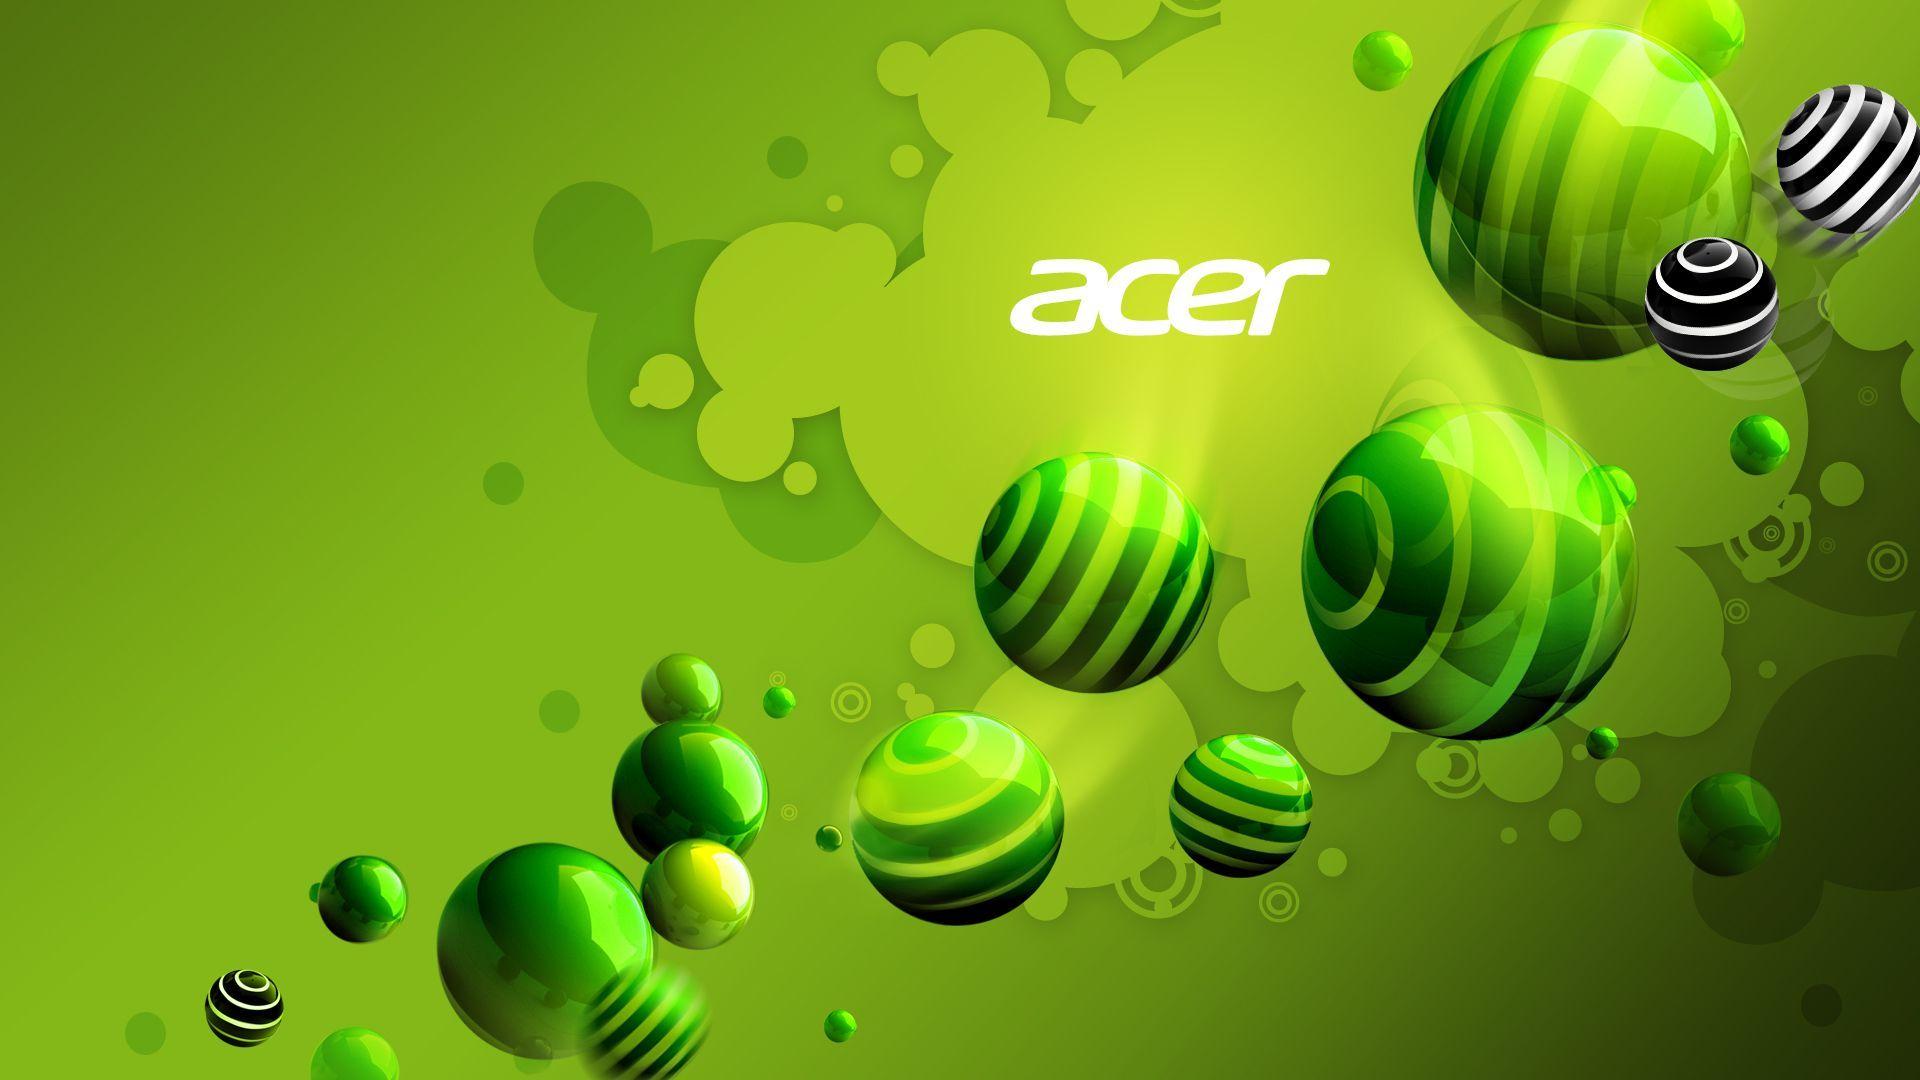 Acer Wallpapers Wallpaper Cave